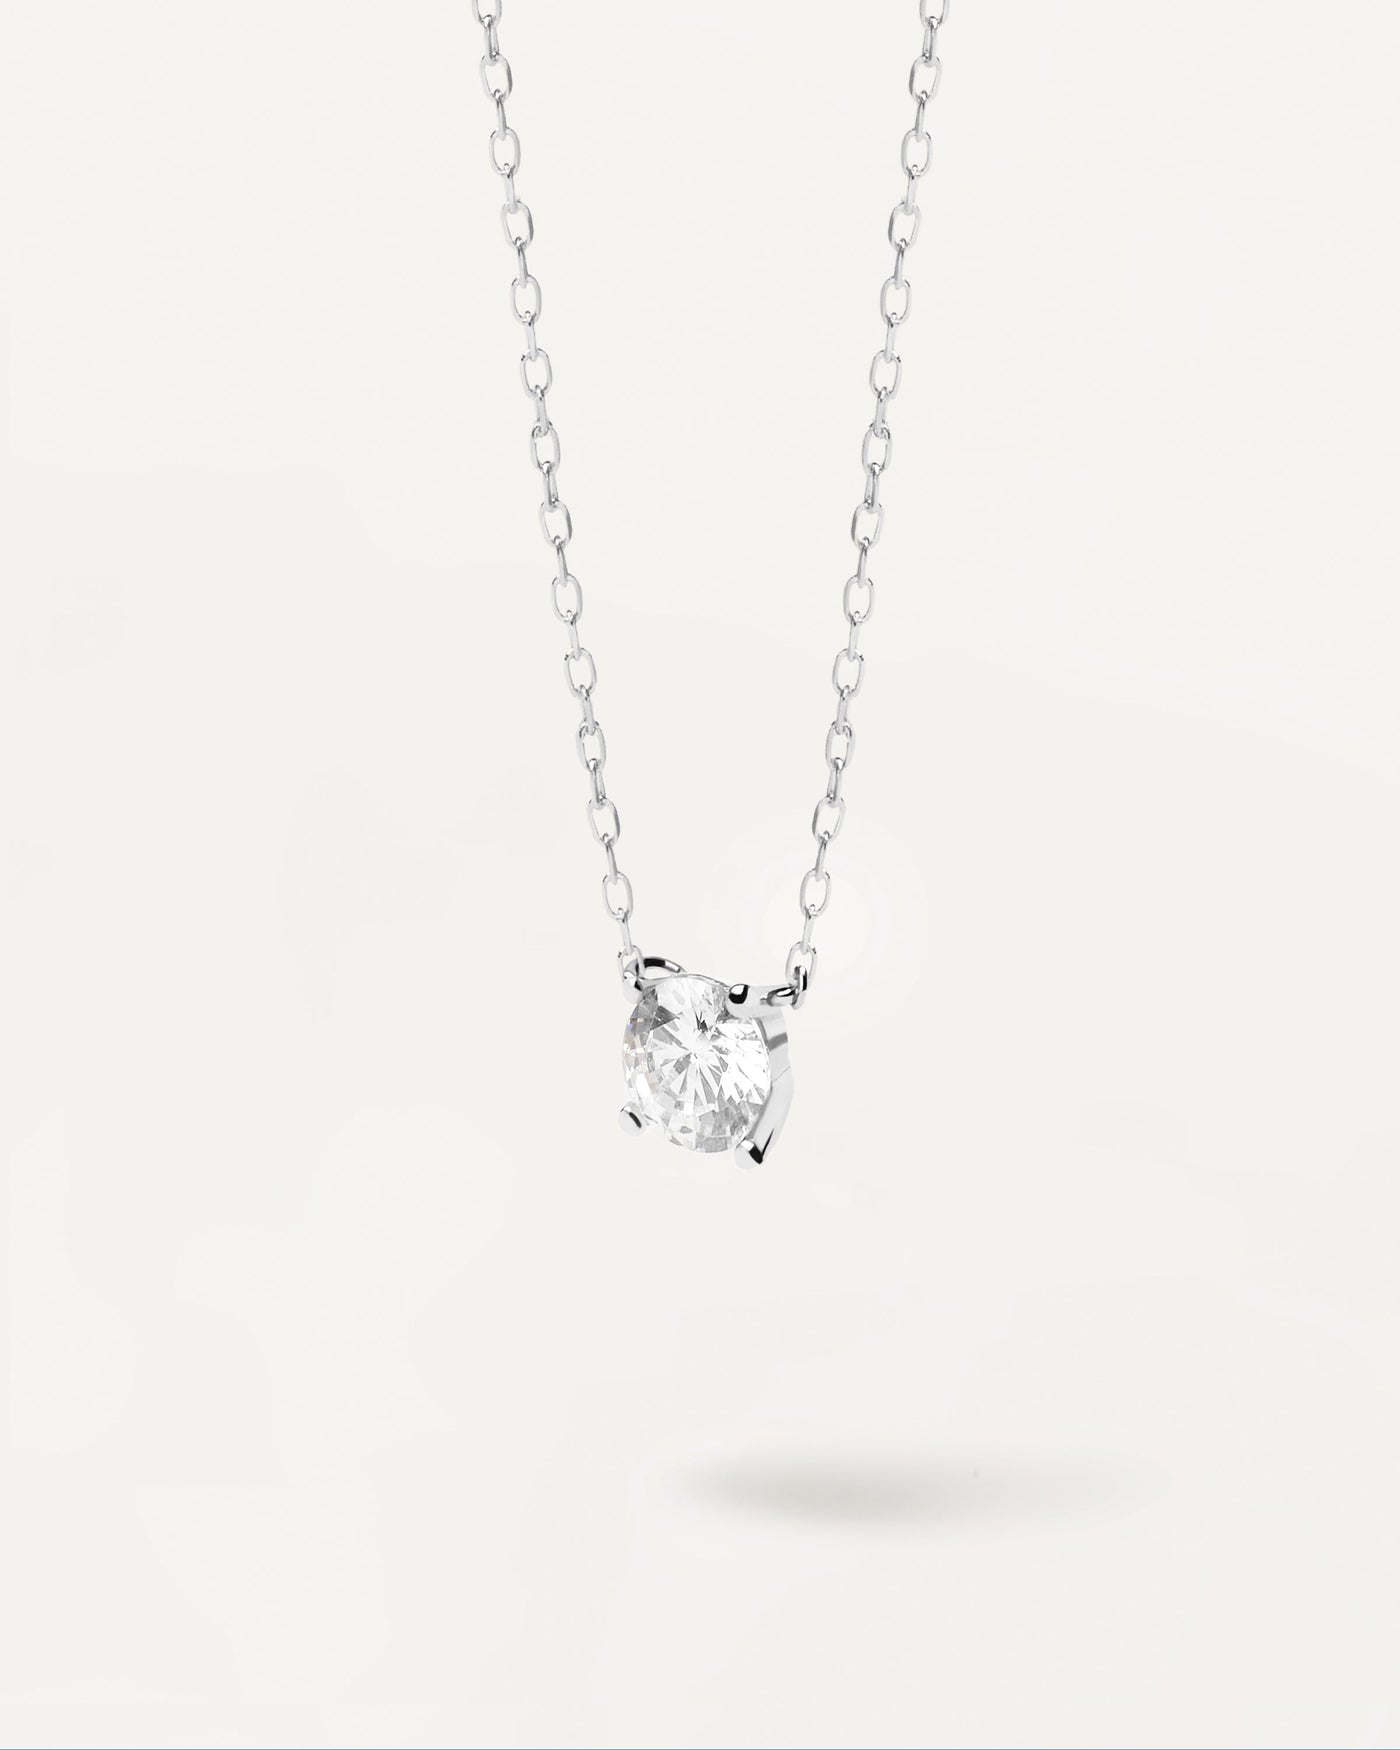 2023 Selection | Diamonds and White Gold Solitaire Supreme Necklace. Solid white gold chain necklace with big round lab-grown diamond of 0.50 carats. Get the latest arrival from PDPAOLA. Place your order safely and get this Best Seller. Free Shipping.